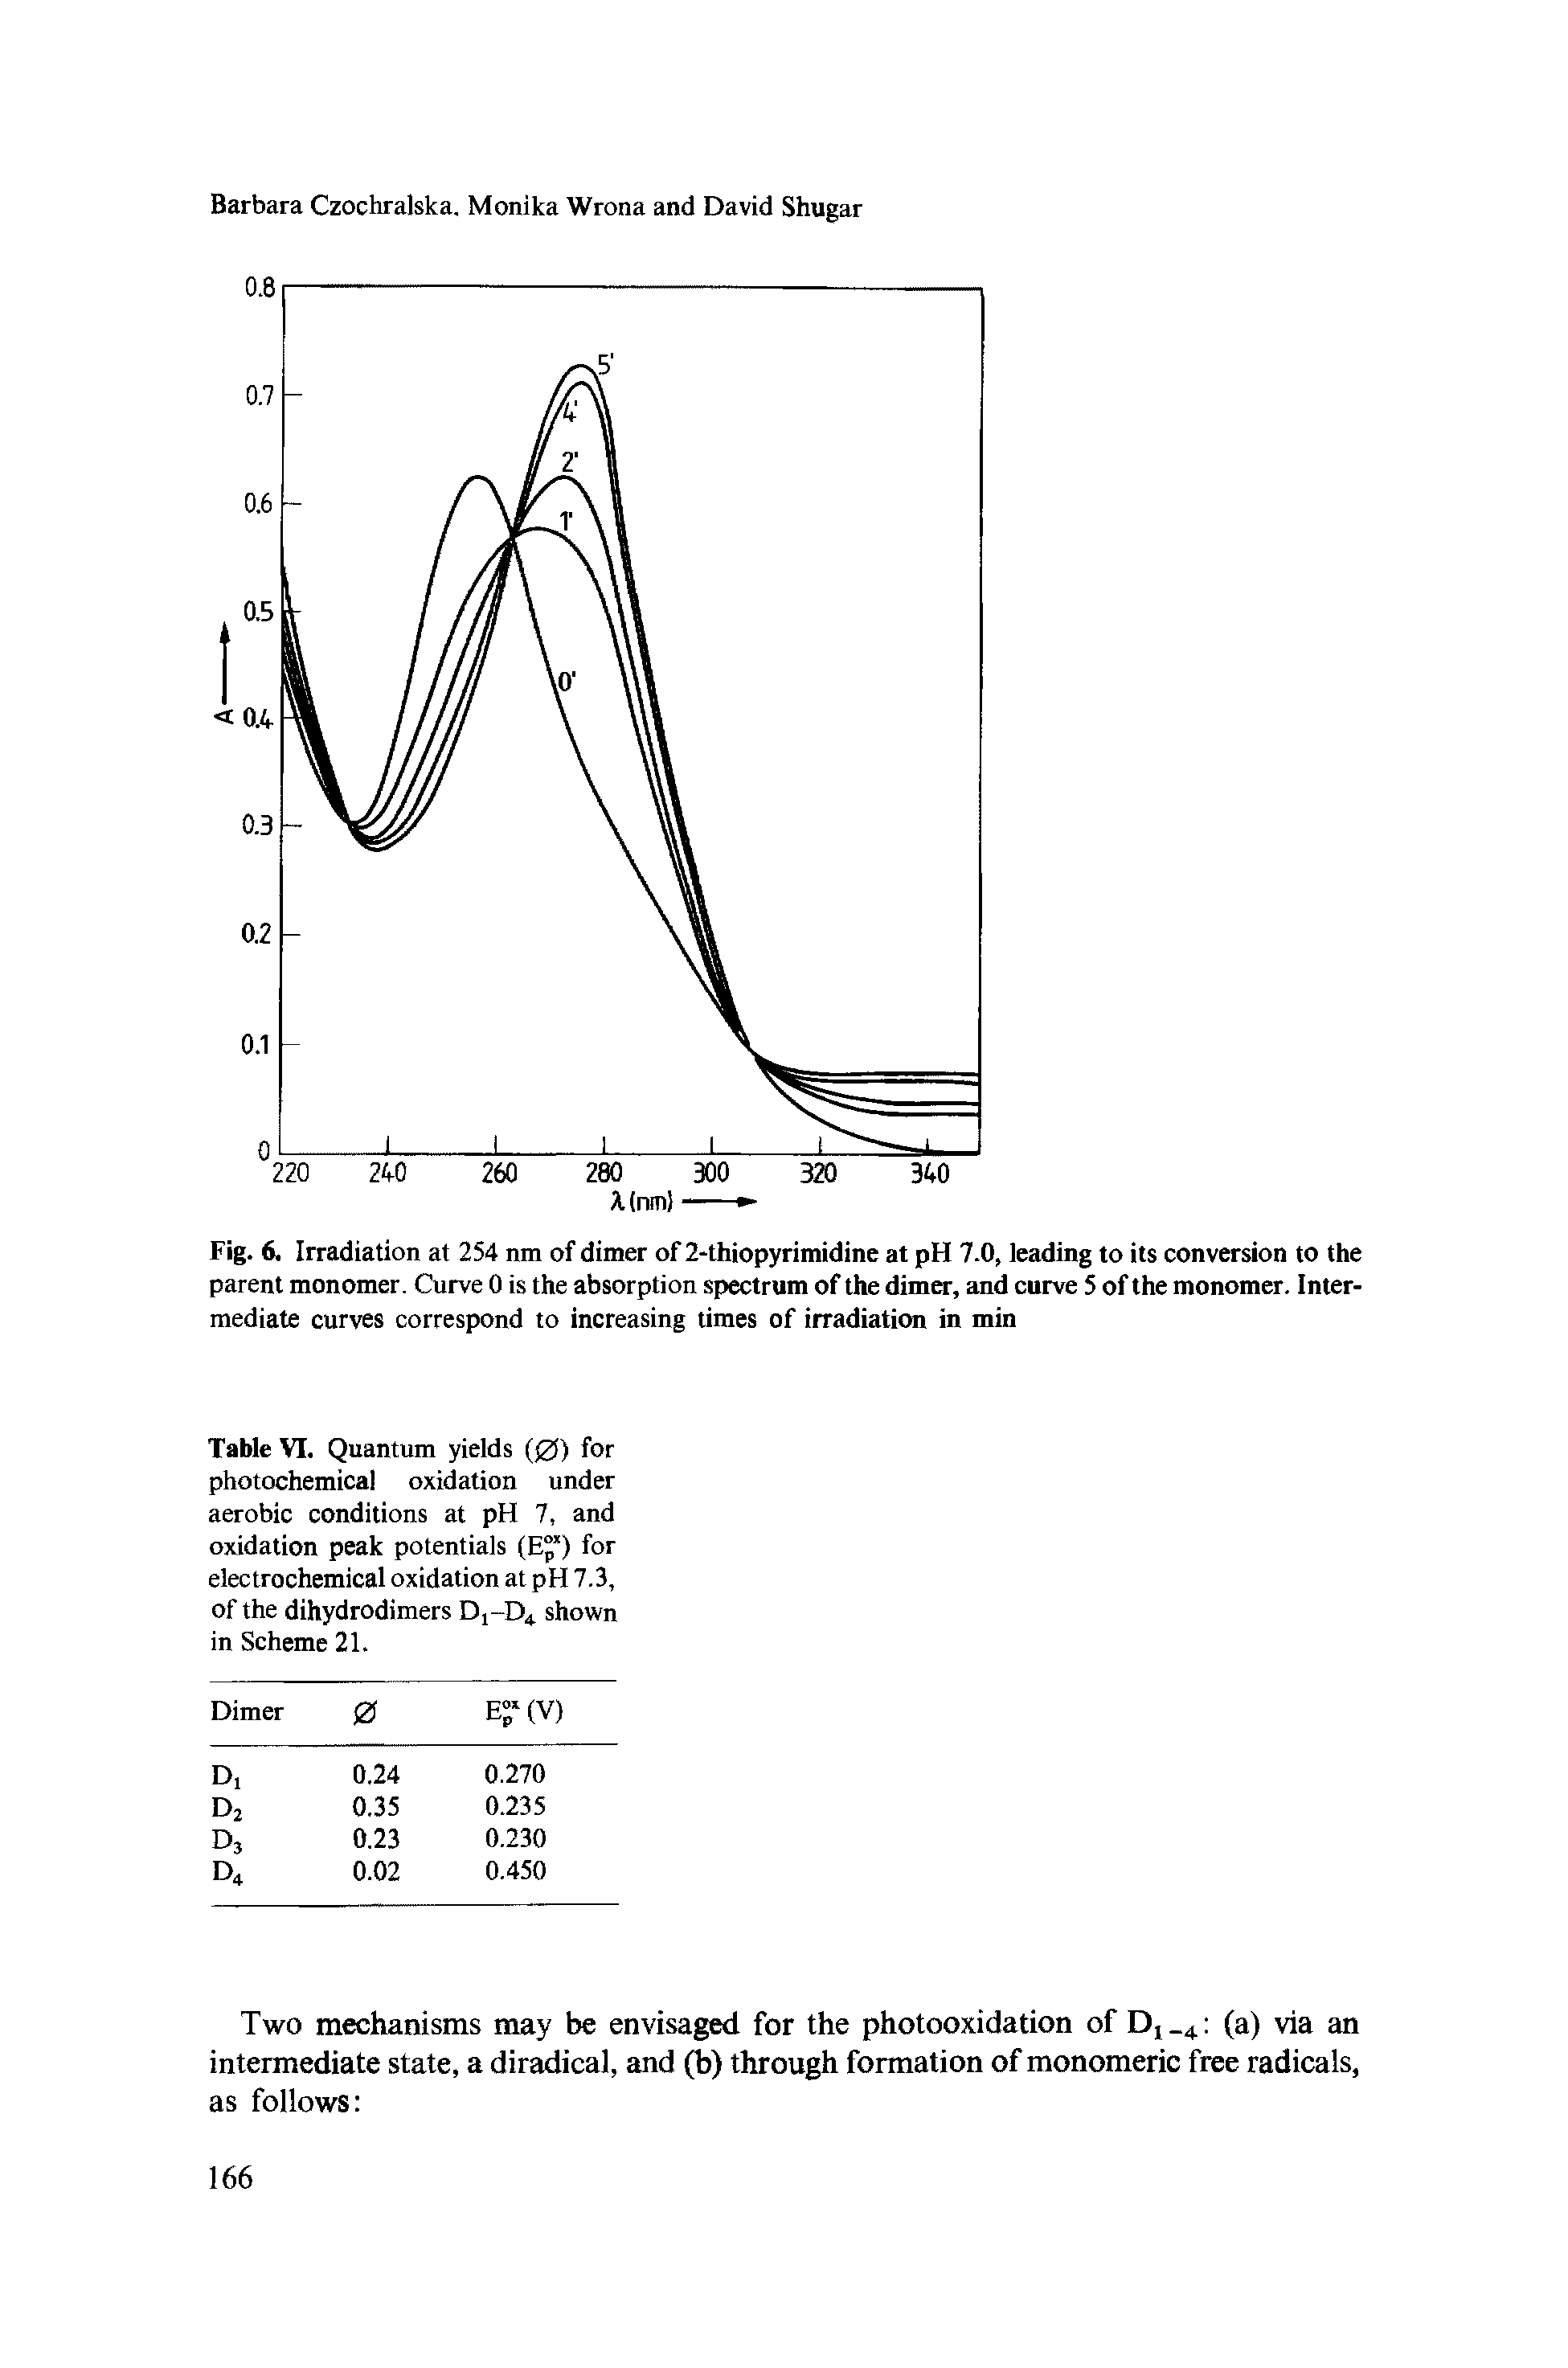 Table VI. Quantum yields (0) for photochemical oxidation under aerobic conditions at pH 7, and oxidation peak potentials (E ) for electrochemical oxidation at pH 7.3, of the dihydrodimers D D,. shown in Scheme 21.